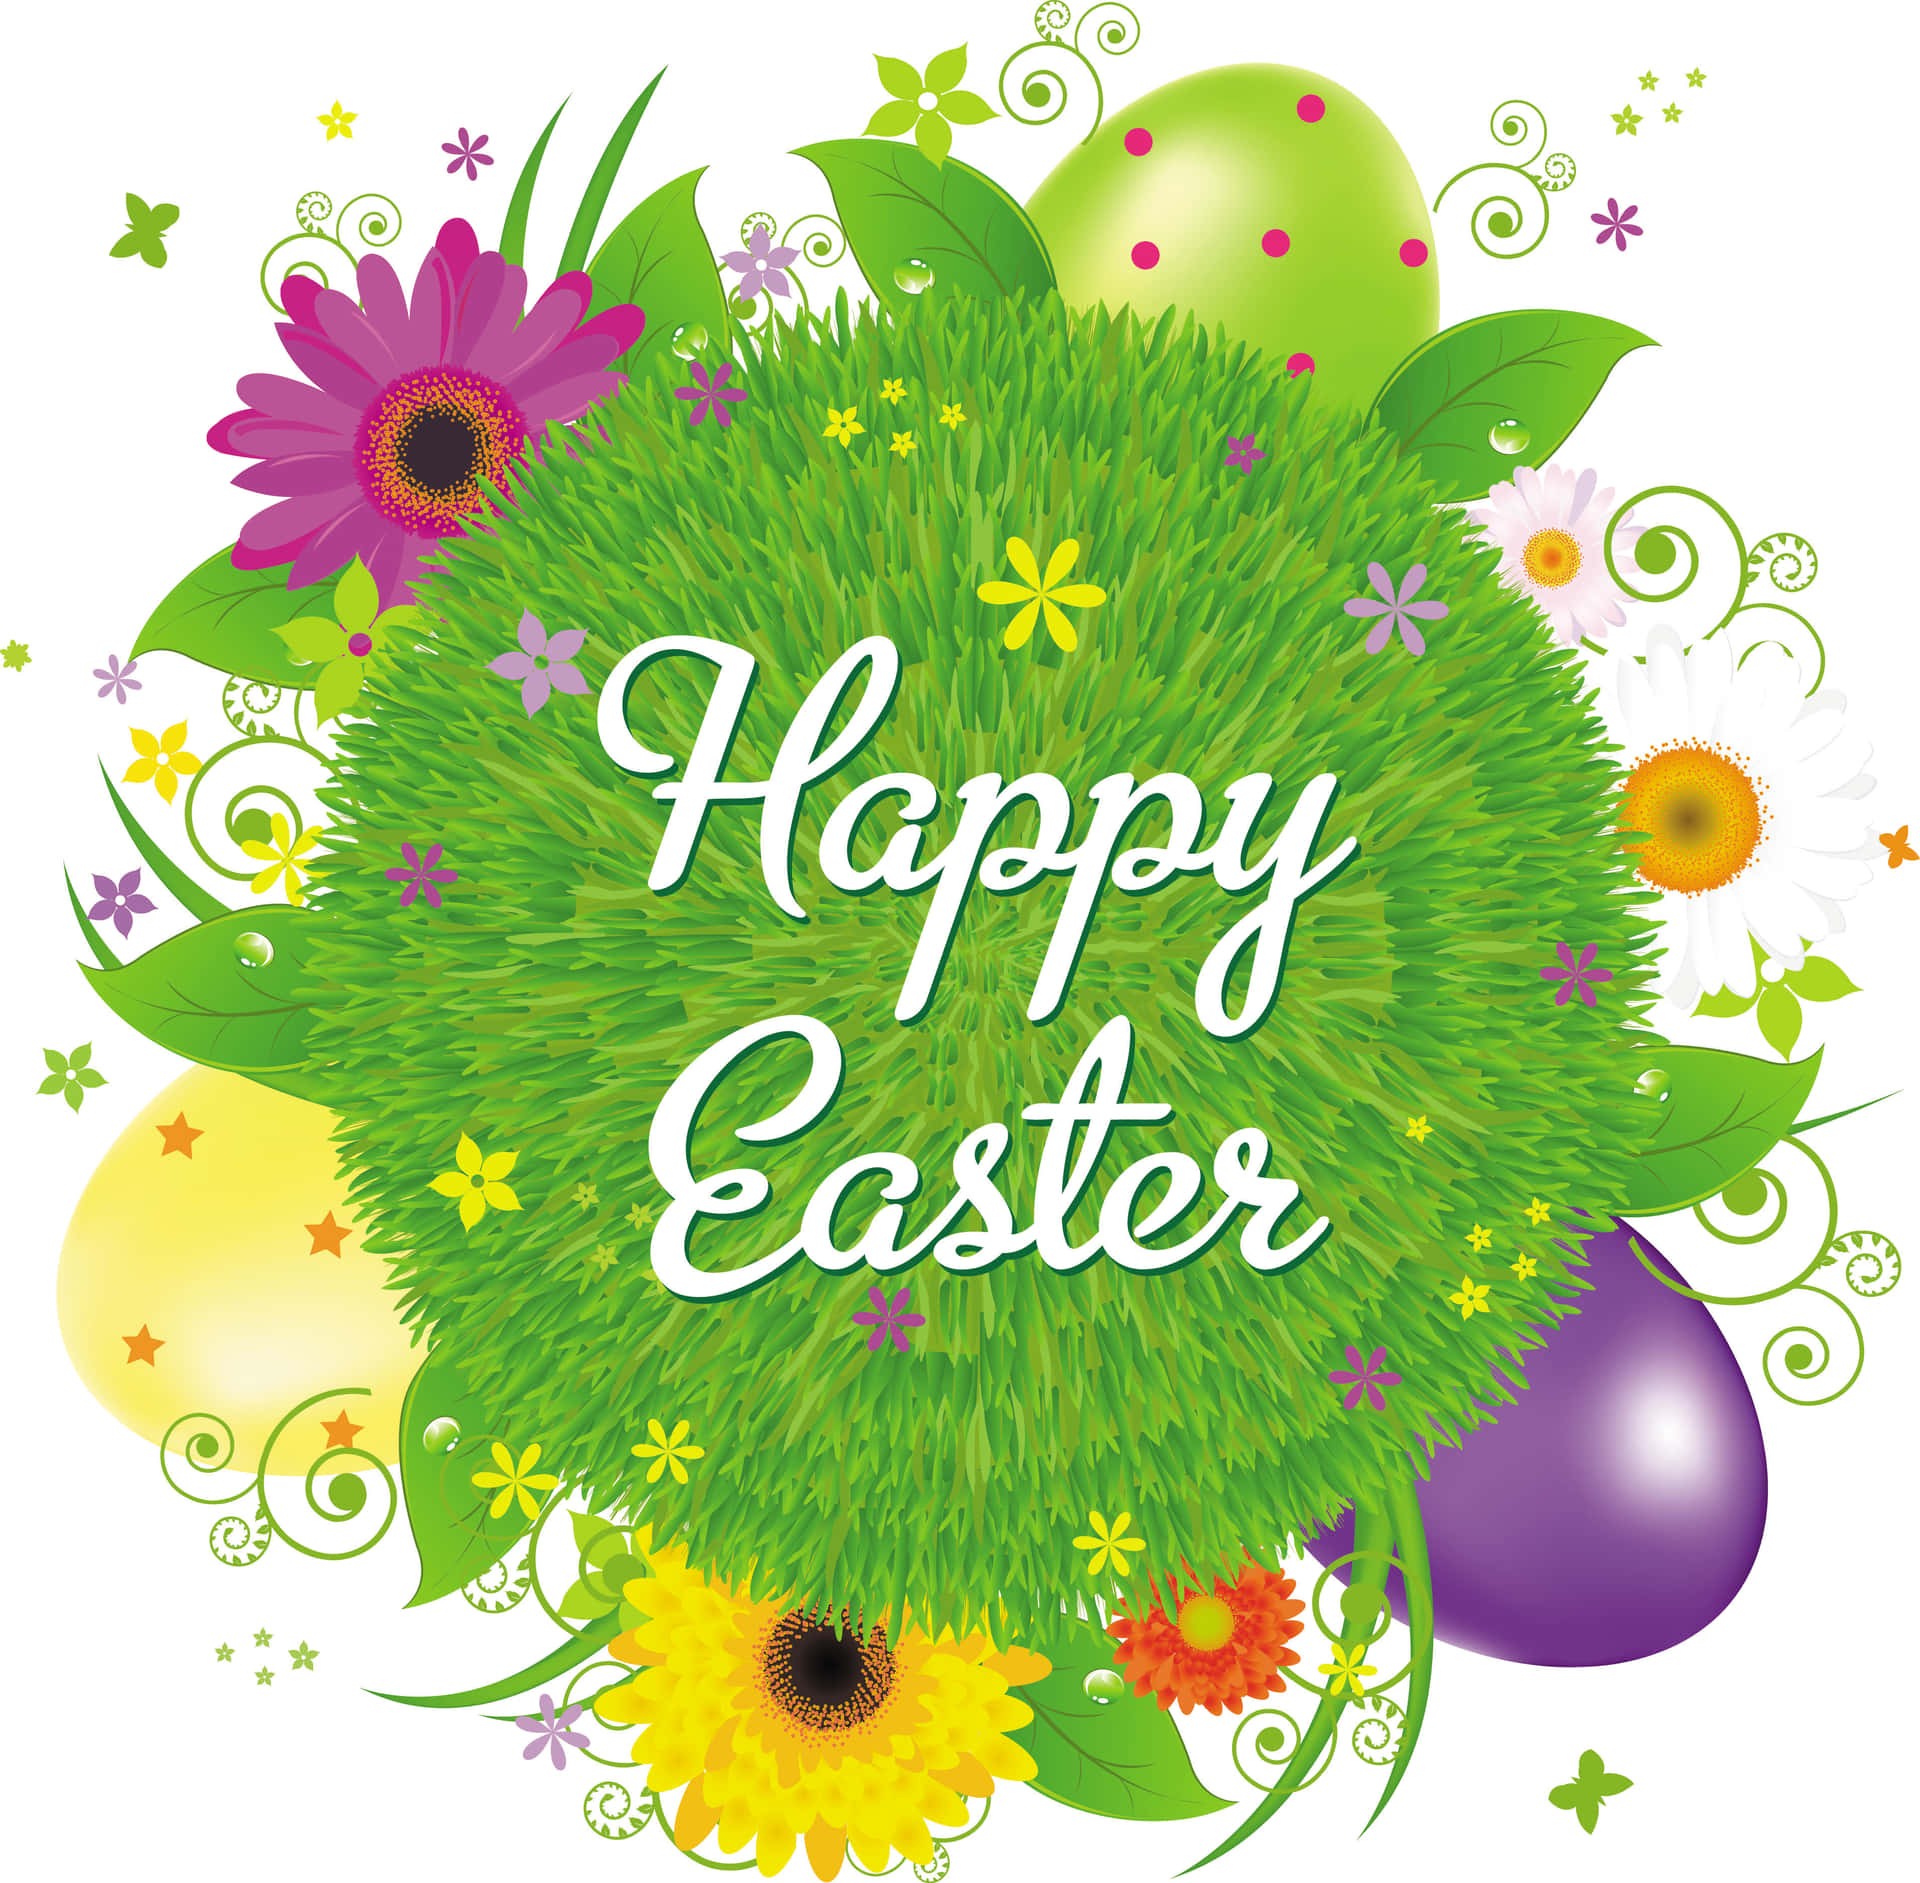 Celebrate Easter with joy and faith!